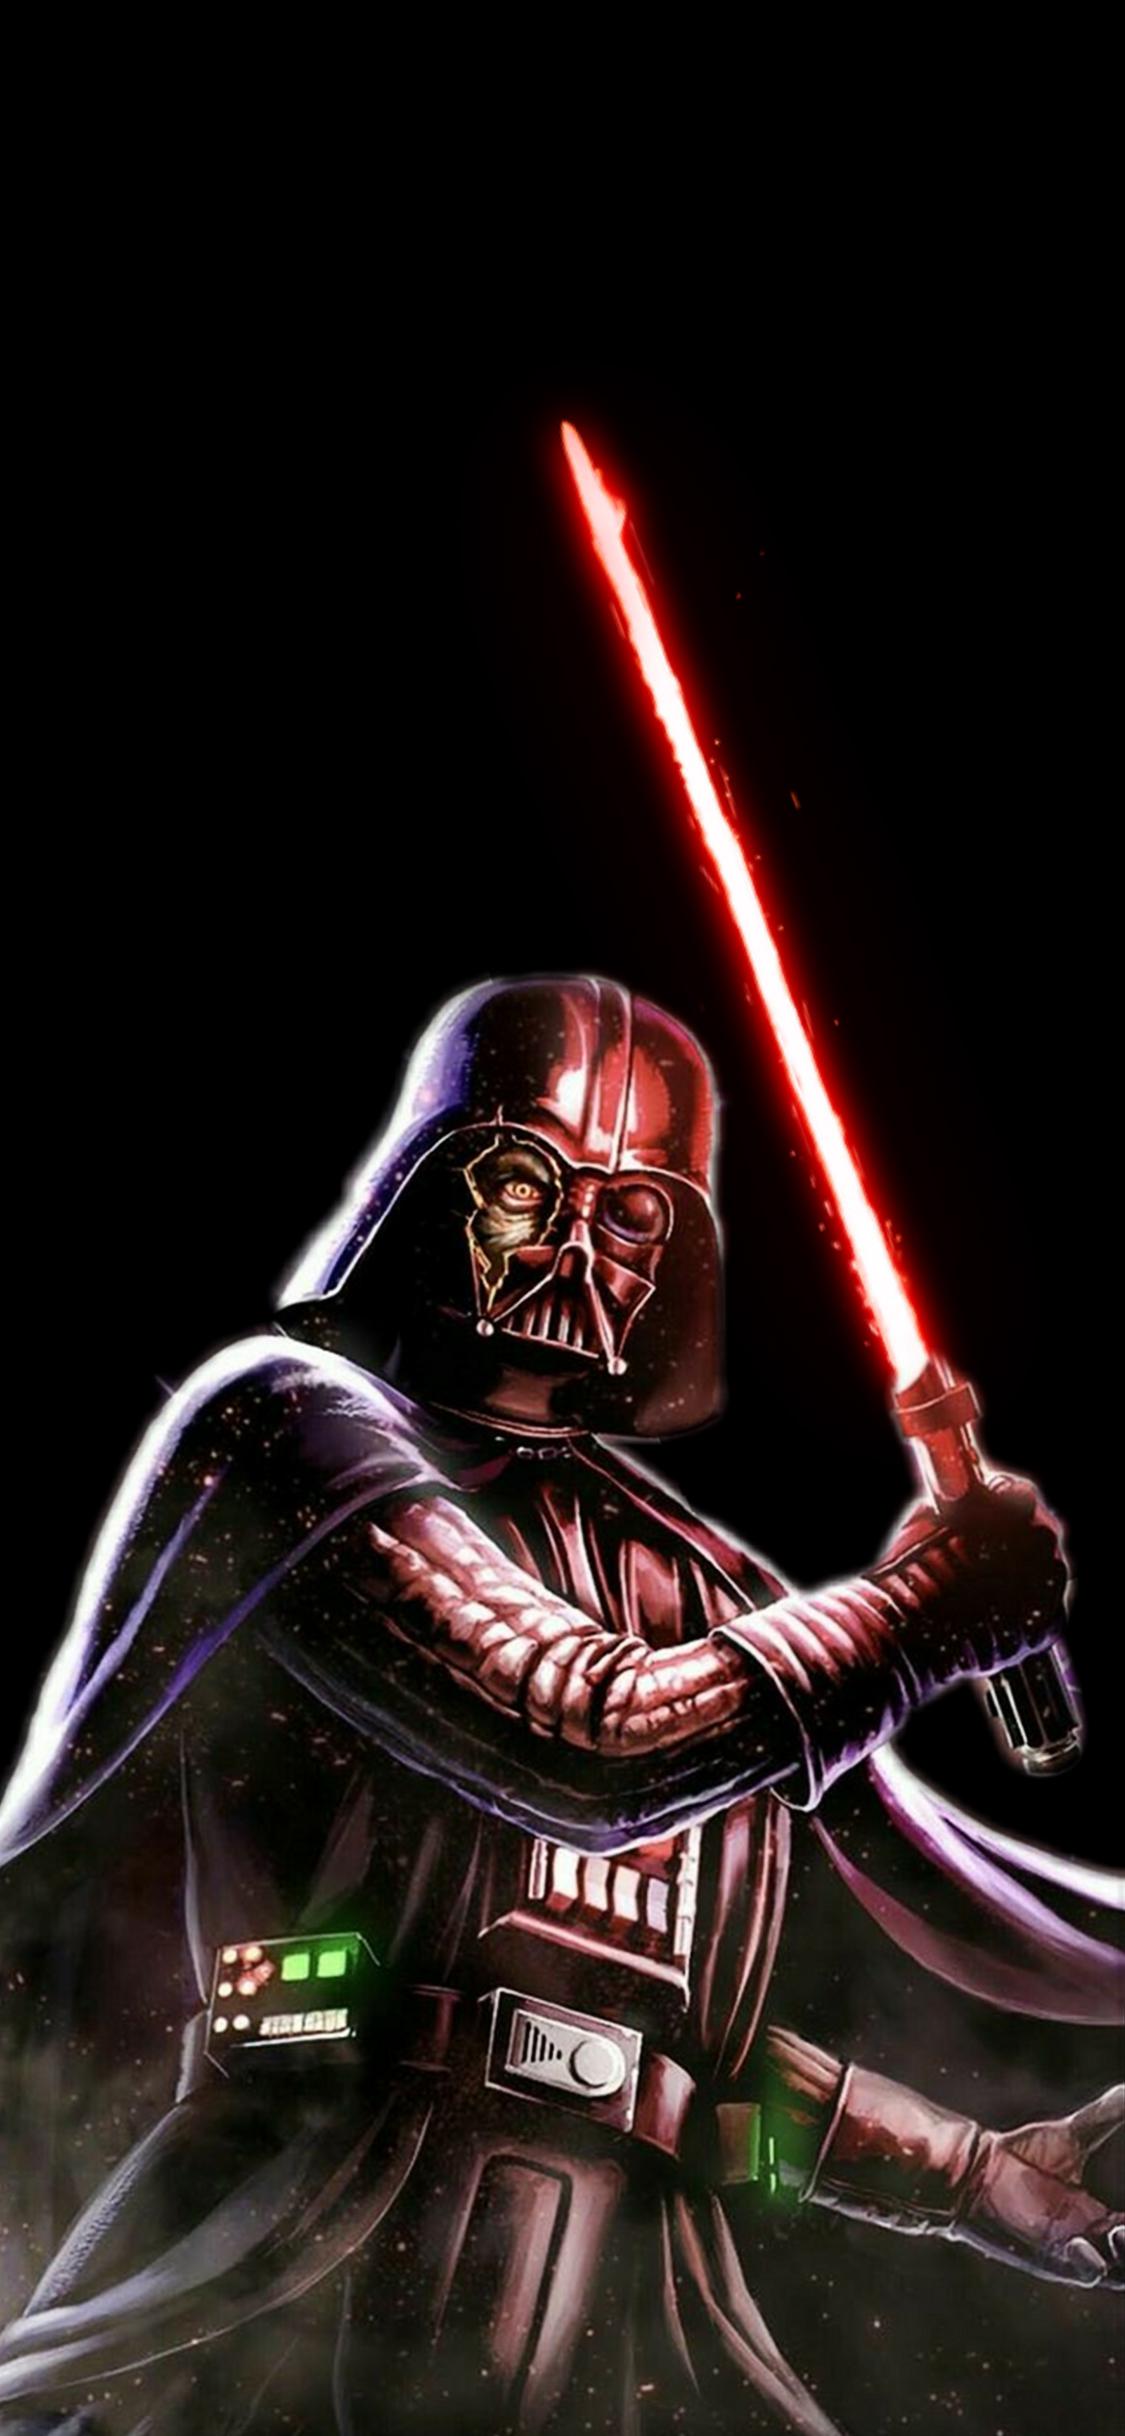 Darth Vader wallpaper for iPhone with high-resolution 1080x1920 pixel. You can use this wallpaper for your iPhone 5, 6, 7, 8, X, XS, XR backgrounds, Mobile Screensaver, or iPad Lock Screen - Darth Vader